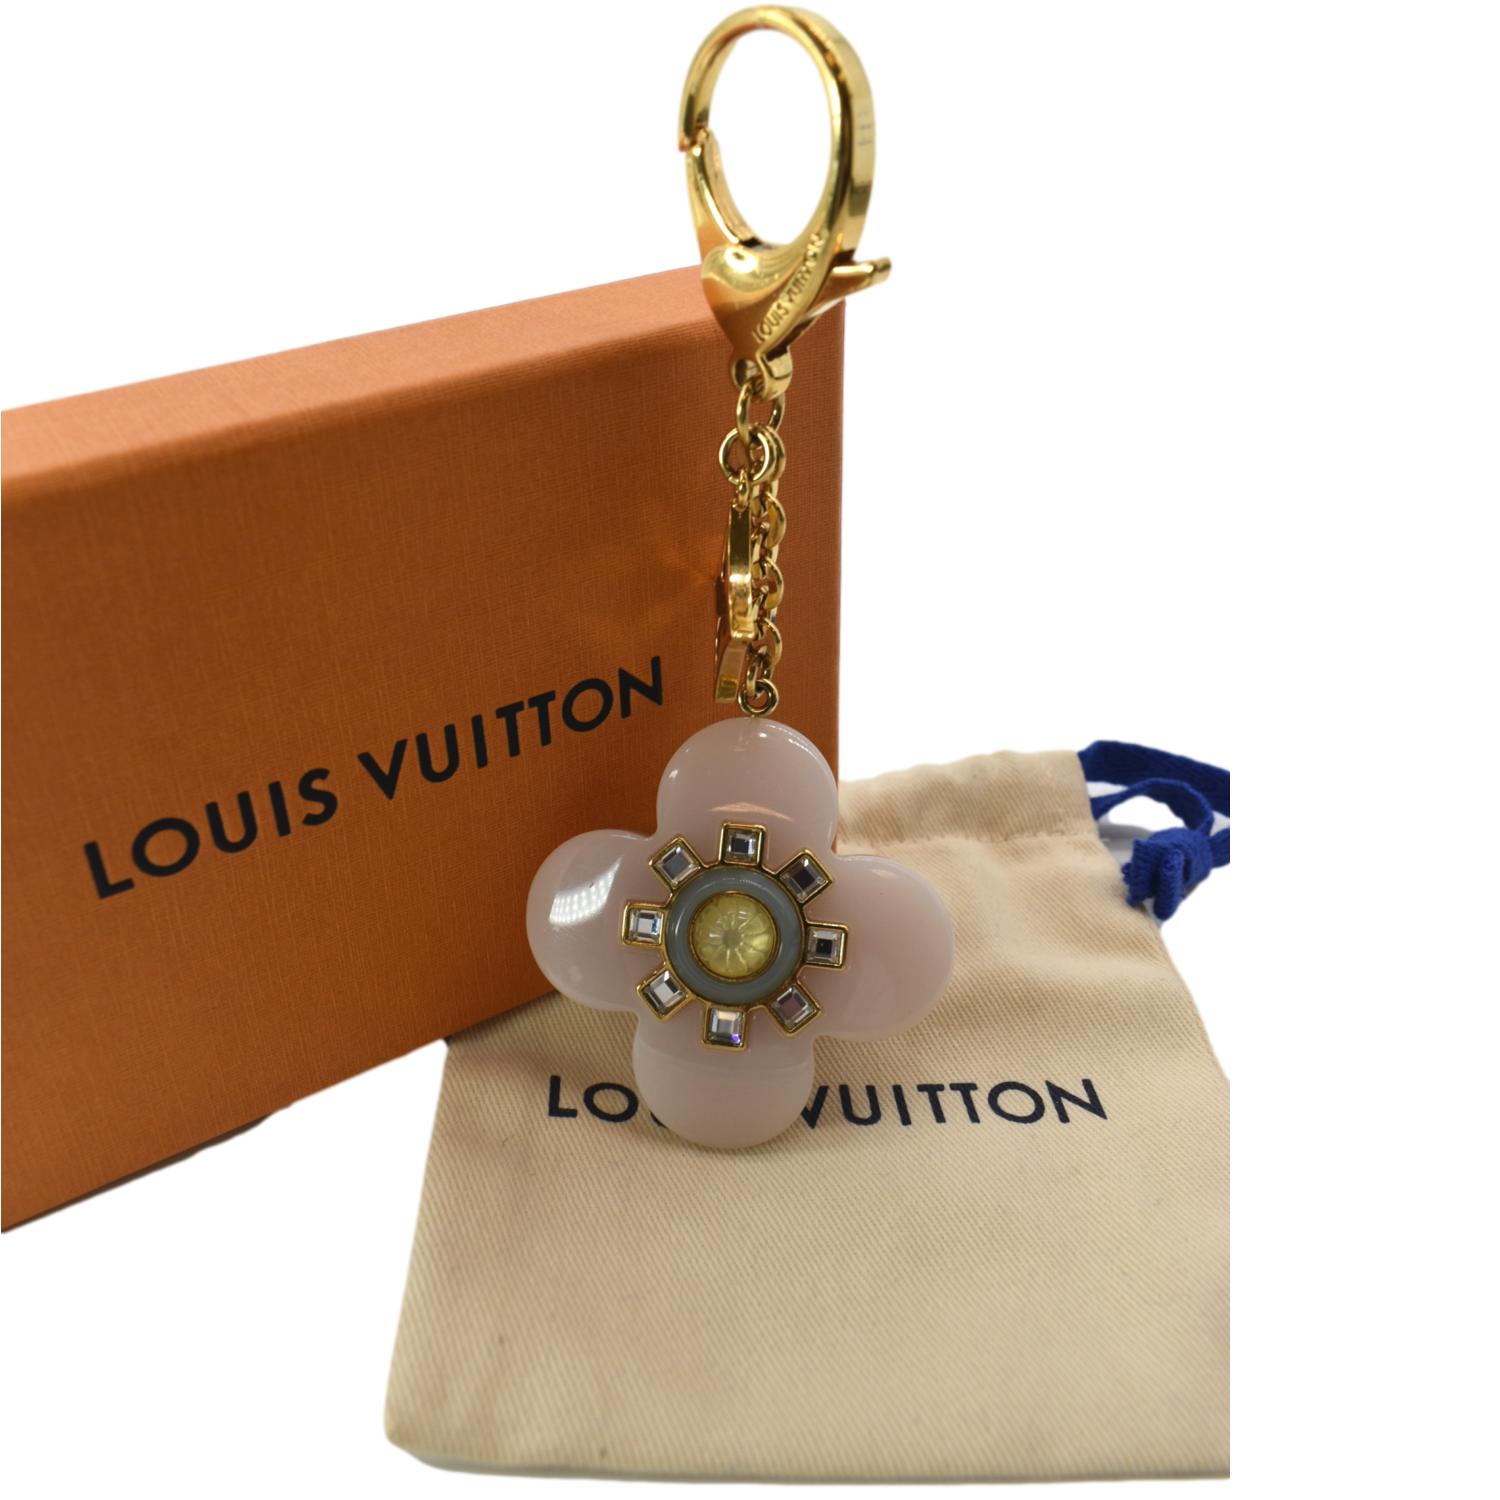 Authenticated Used LOUIS VUITTON Louis Vuitton Portocre LV Harlow